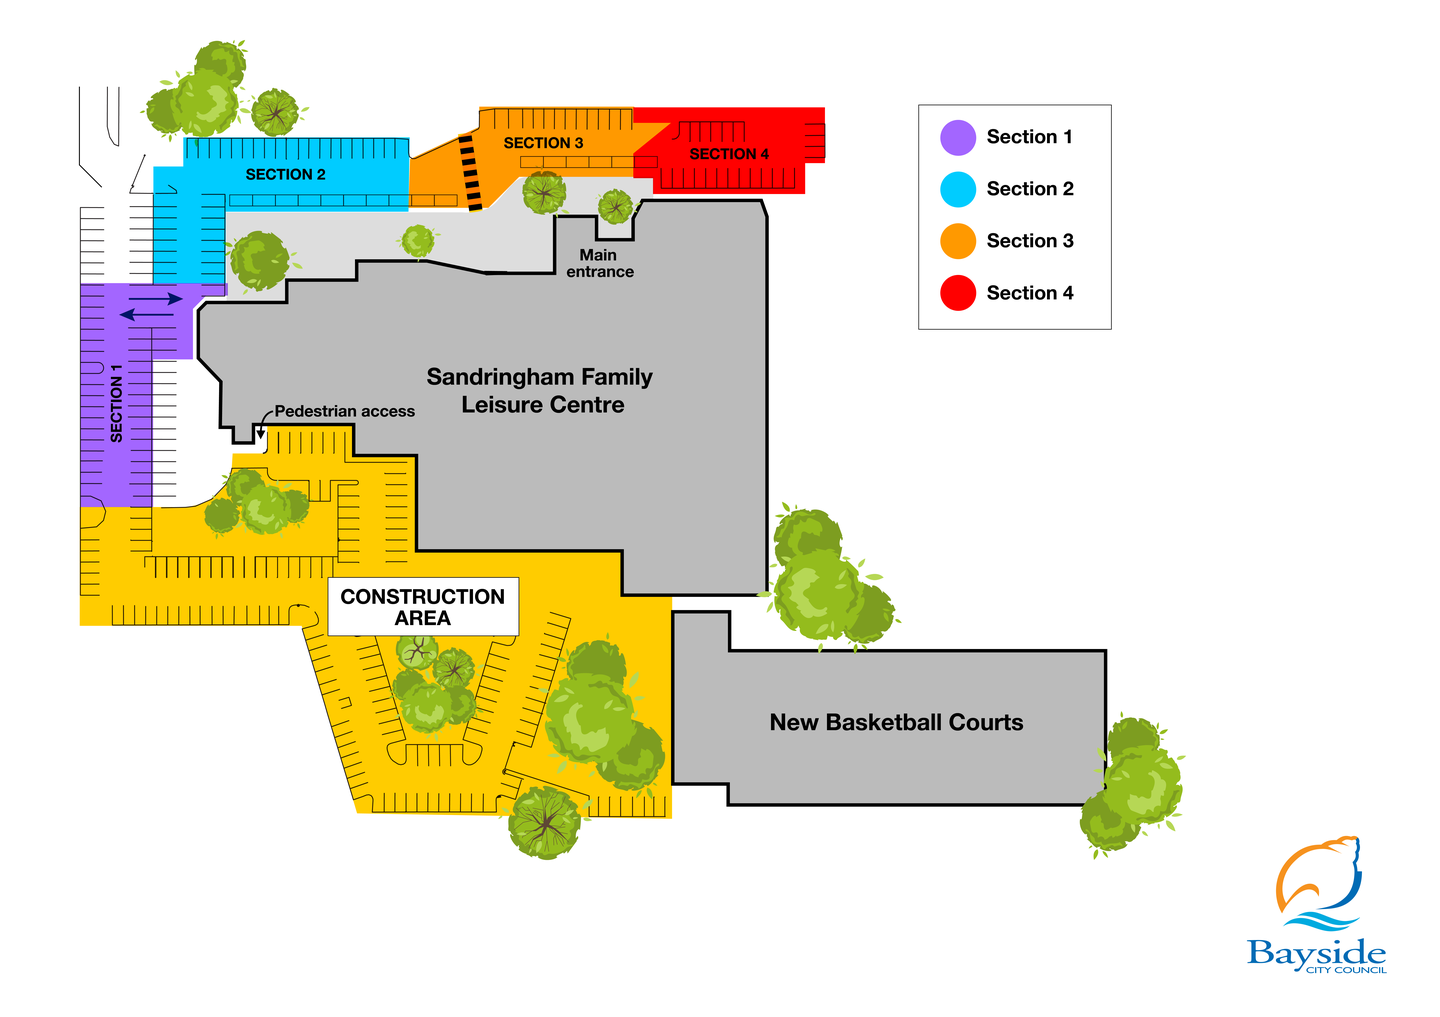 Overview of Sandringham Family Leisure Centre with carpark indicating works stages 1, 2, 3 and 4 as well as area under construction